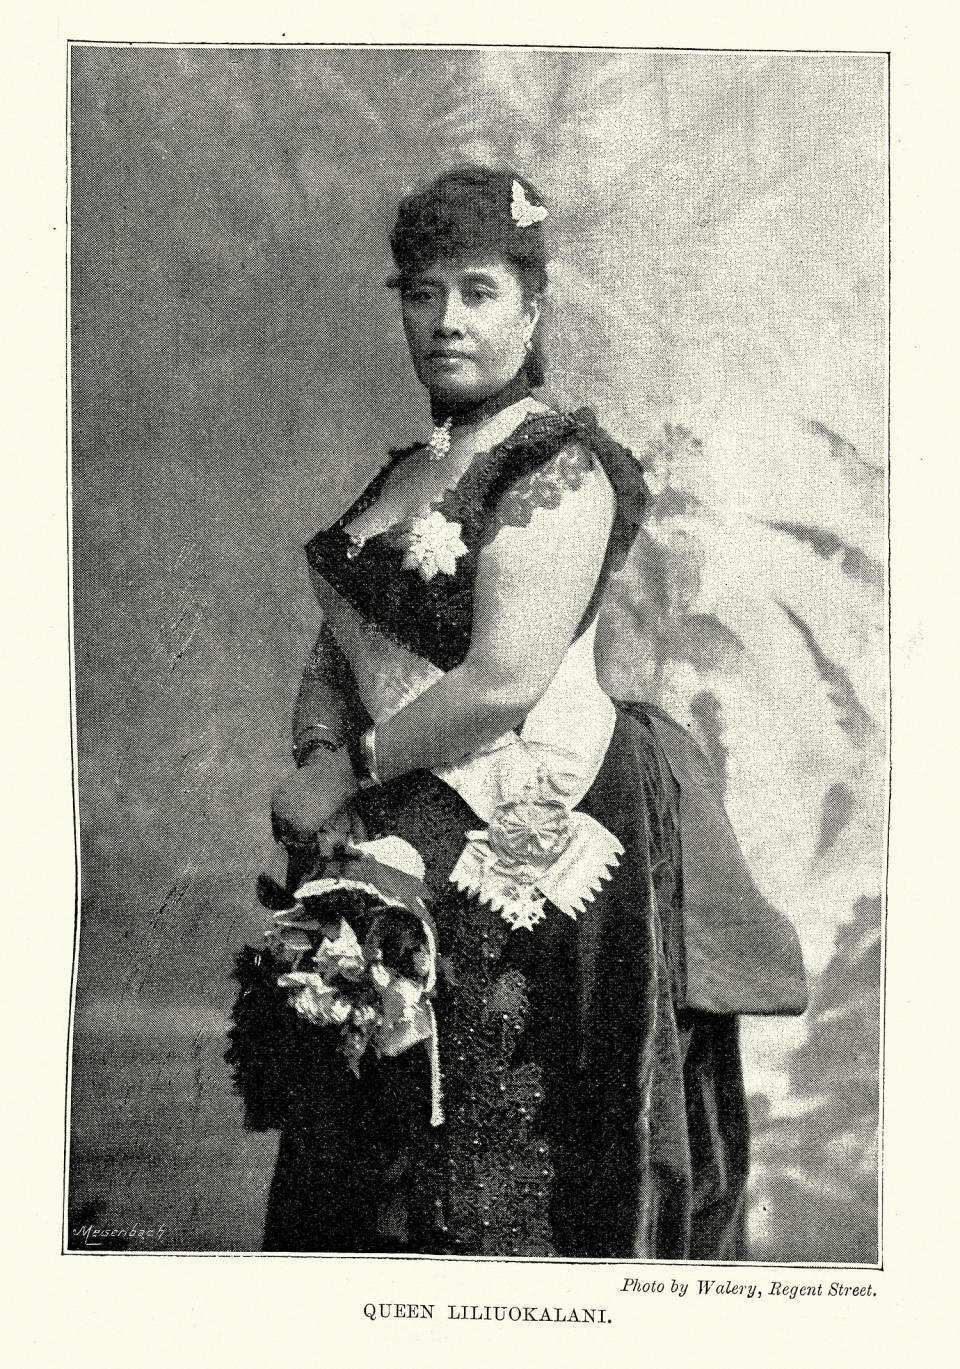 Liliʻuokalani the queen of the Kingdom of Hawaii, Victorian 19th Century (duncan1890 / Getty Images)